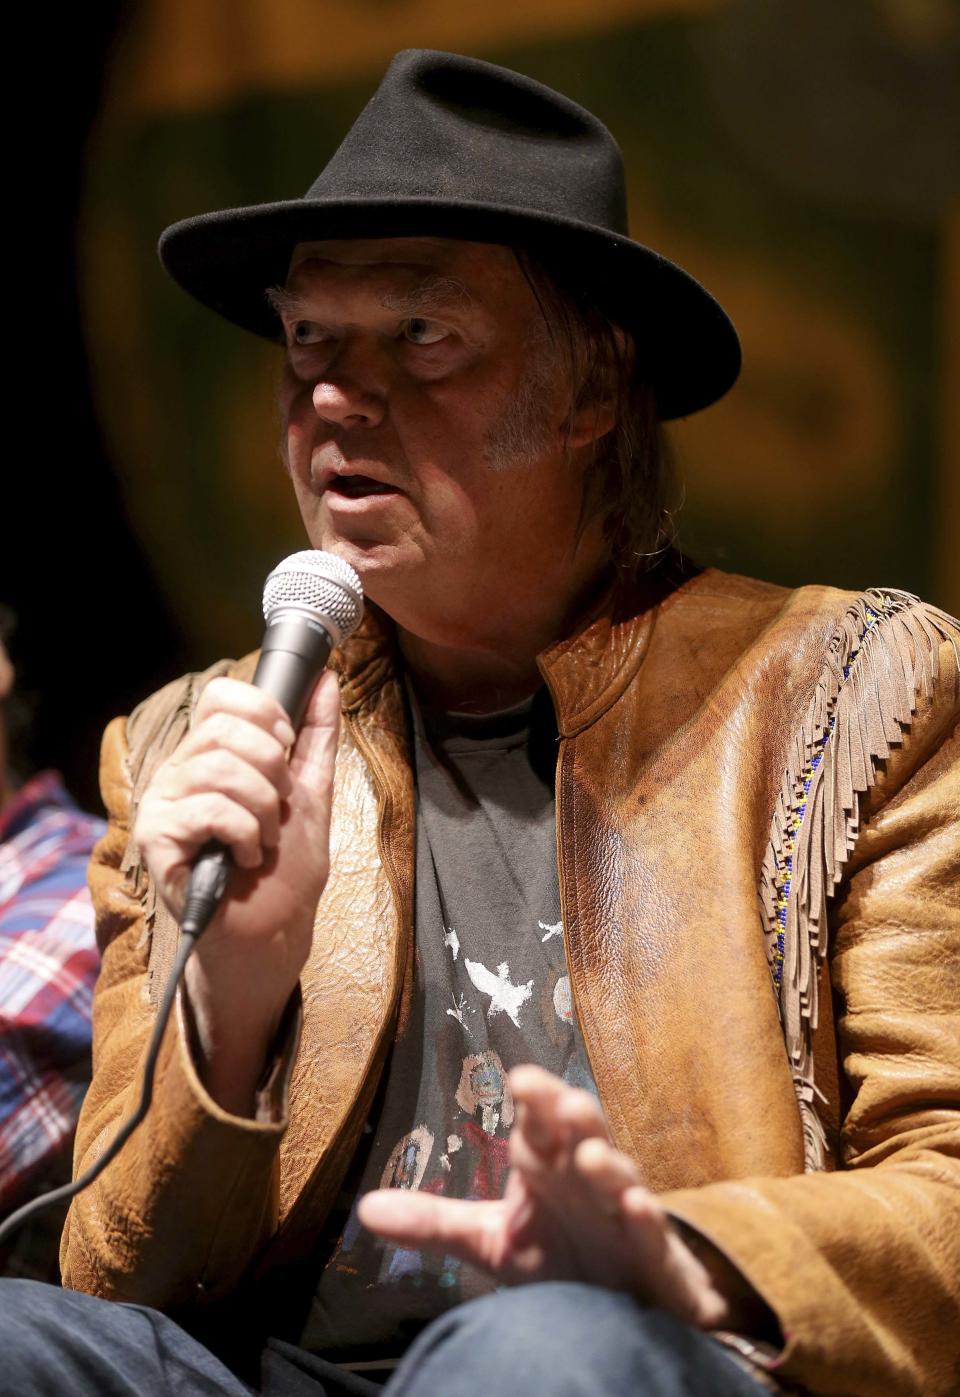 Musician Neil Young addresses the media before the "Honor The Treaties" concert series at the Centennial Concert Hall in Winnipeg, Manitoba, January 16, 2014. Young is touring to raise money for the Athabasca Chipewyan First Nation aboriginal group, which is trying to prevent the expansion of tar sands development. REUTERS/Trevor Hagan (CANADA - Tags: POLITICS ENTERTAINMENT ENVIRONMENT ENERGY SOCIETY)